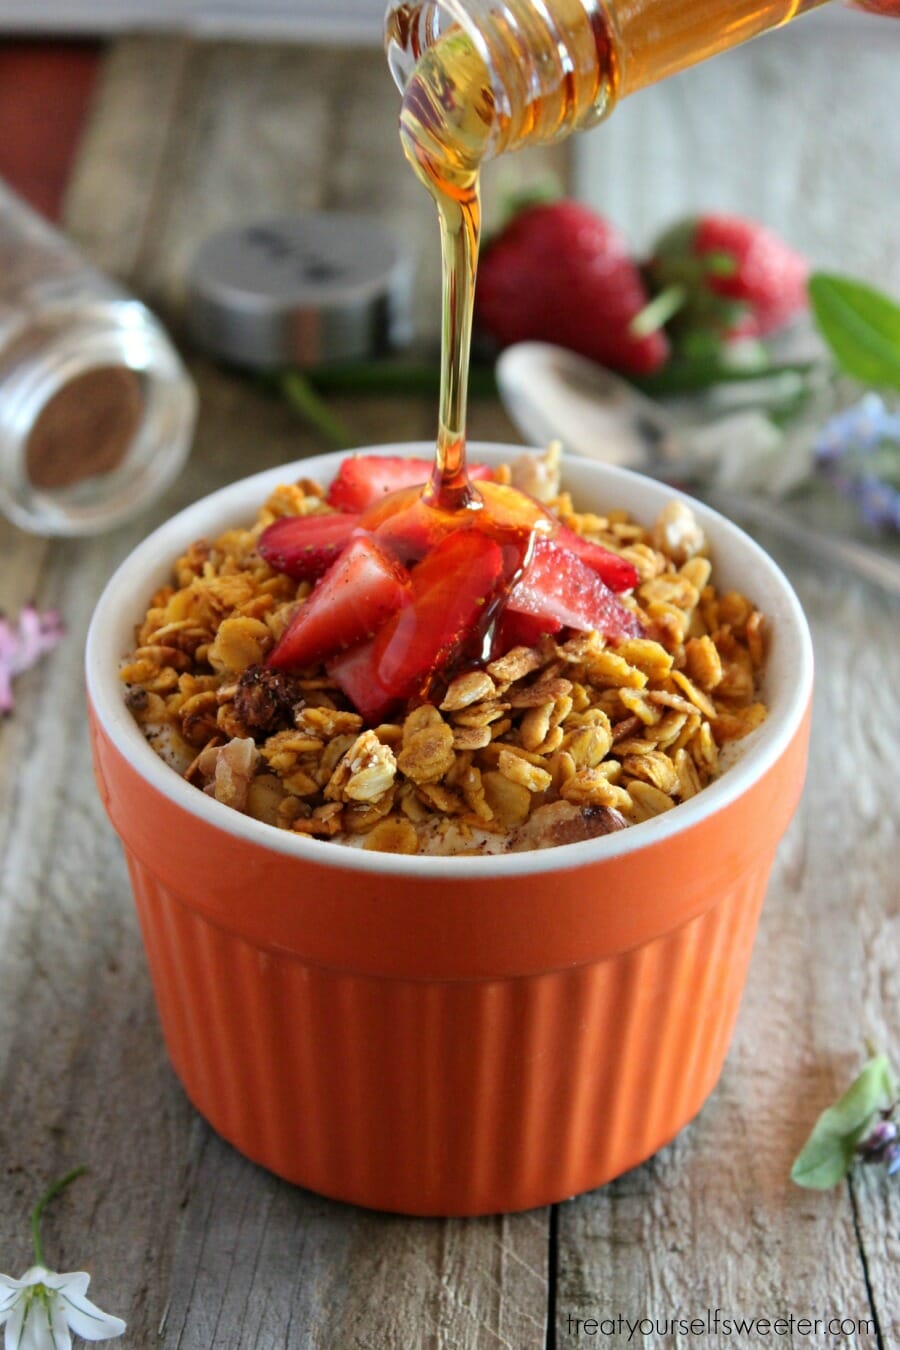 Pumpkin Spice Granola; crunchy granola with a hint of pumpkin, fall spices and sweetness of maple syrup. Perfect for brunch or a seasonal gift.